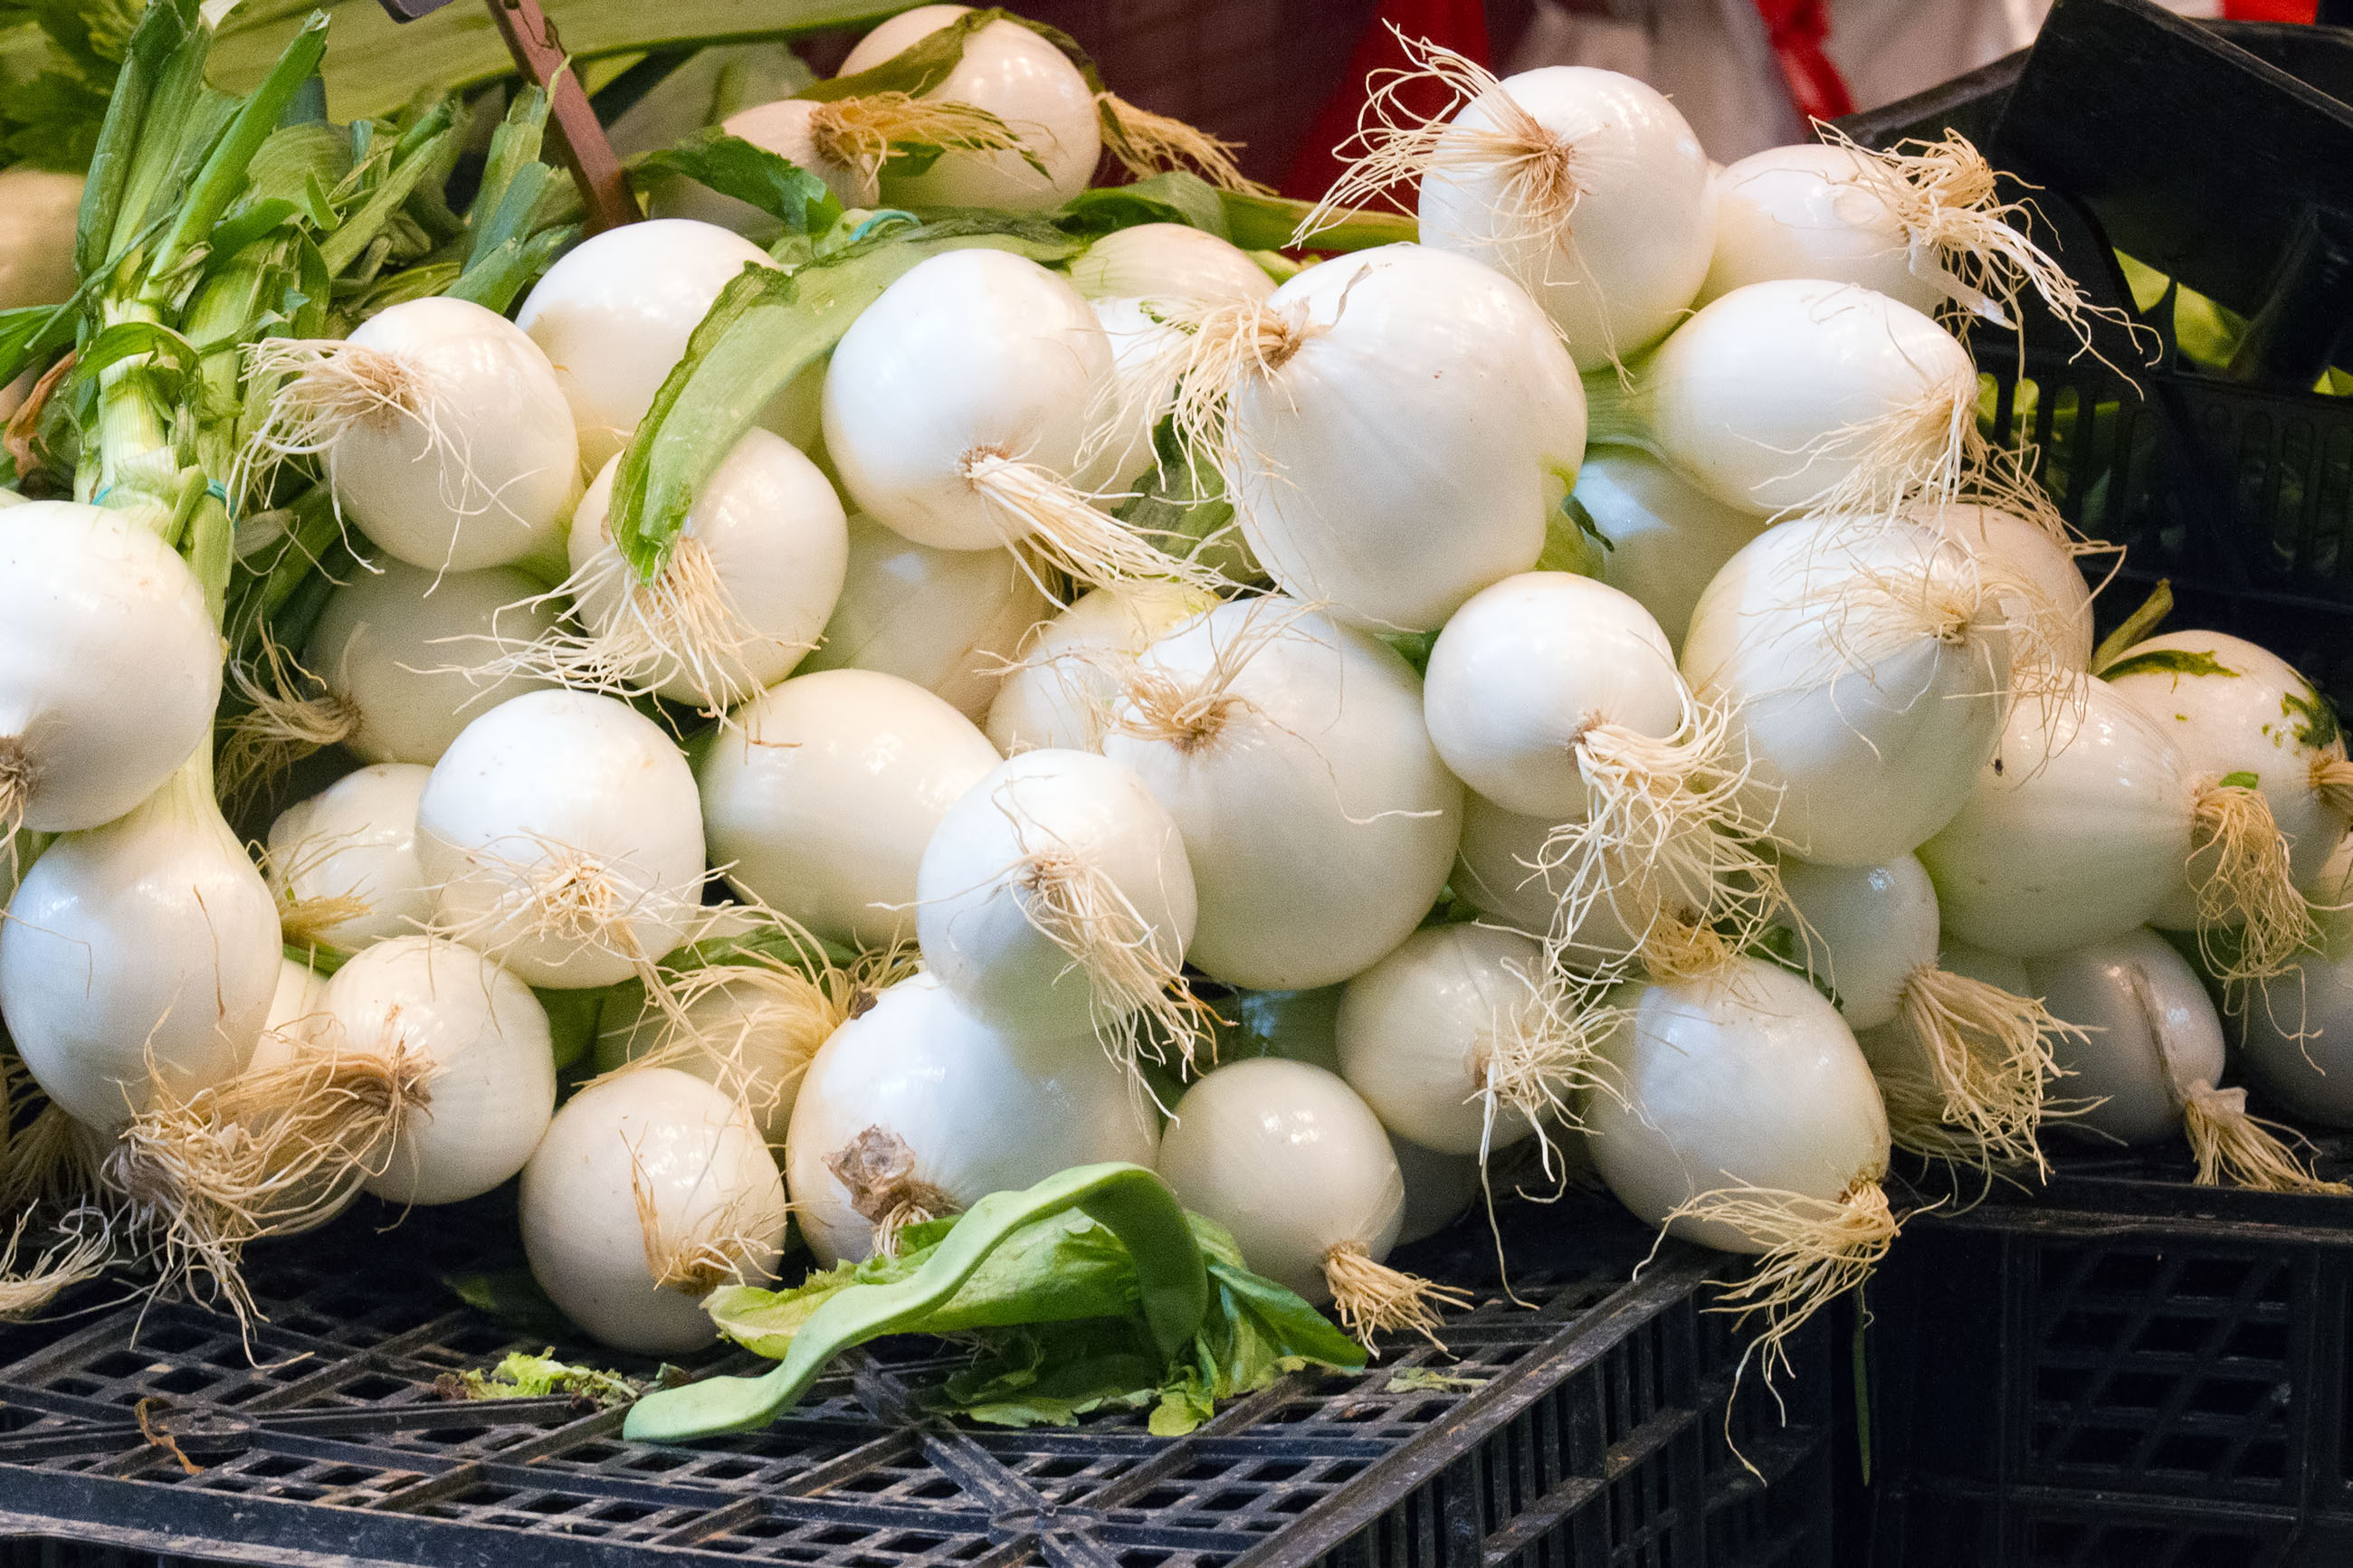 Onions at the market photo